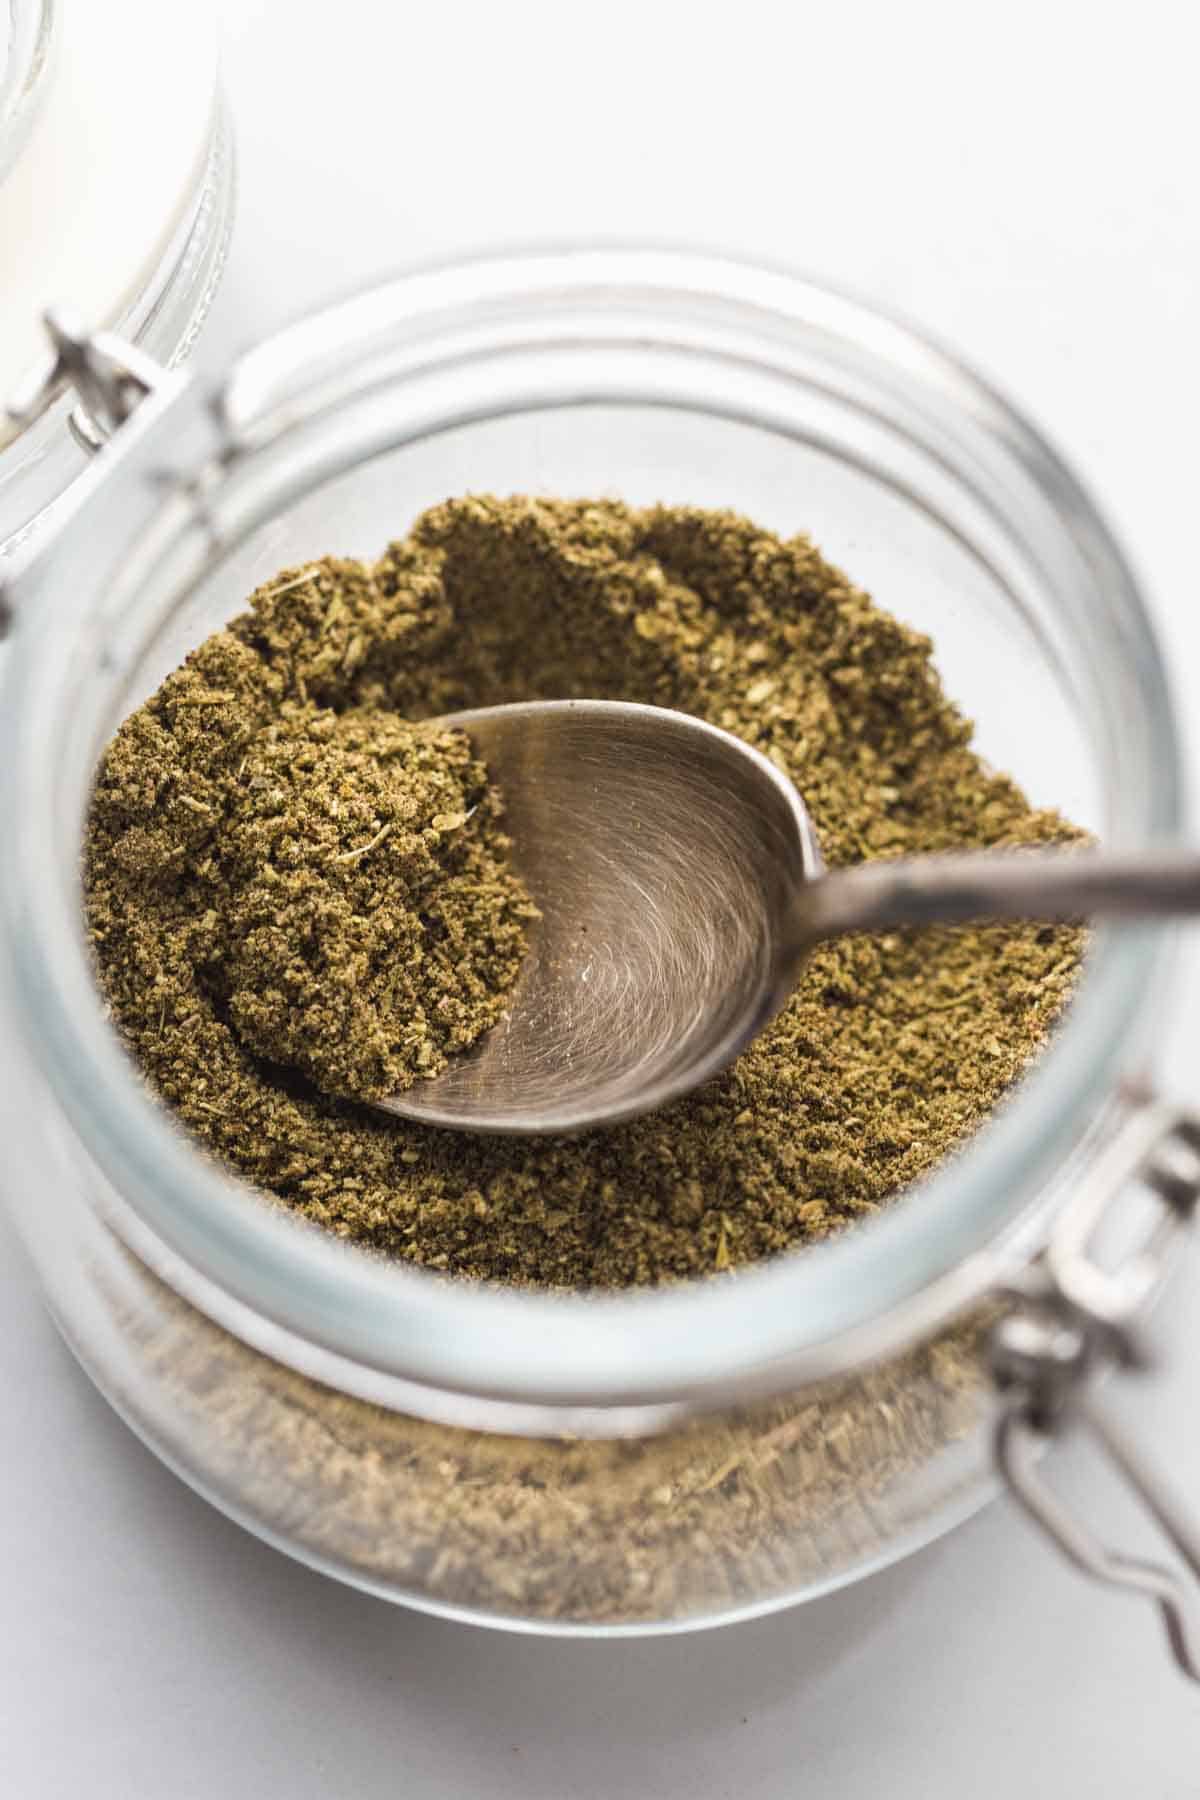 Homemade Poultry Seasoning in a jar with a spoon